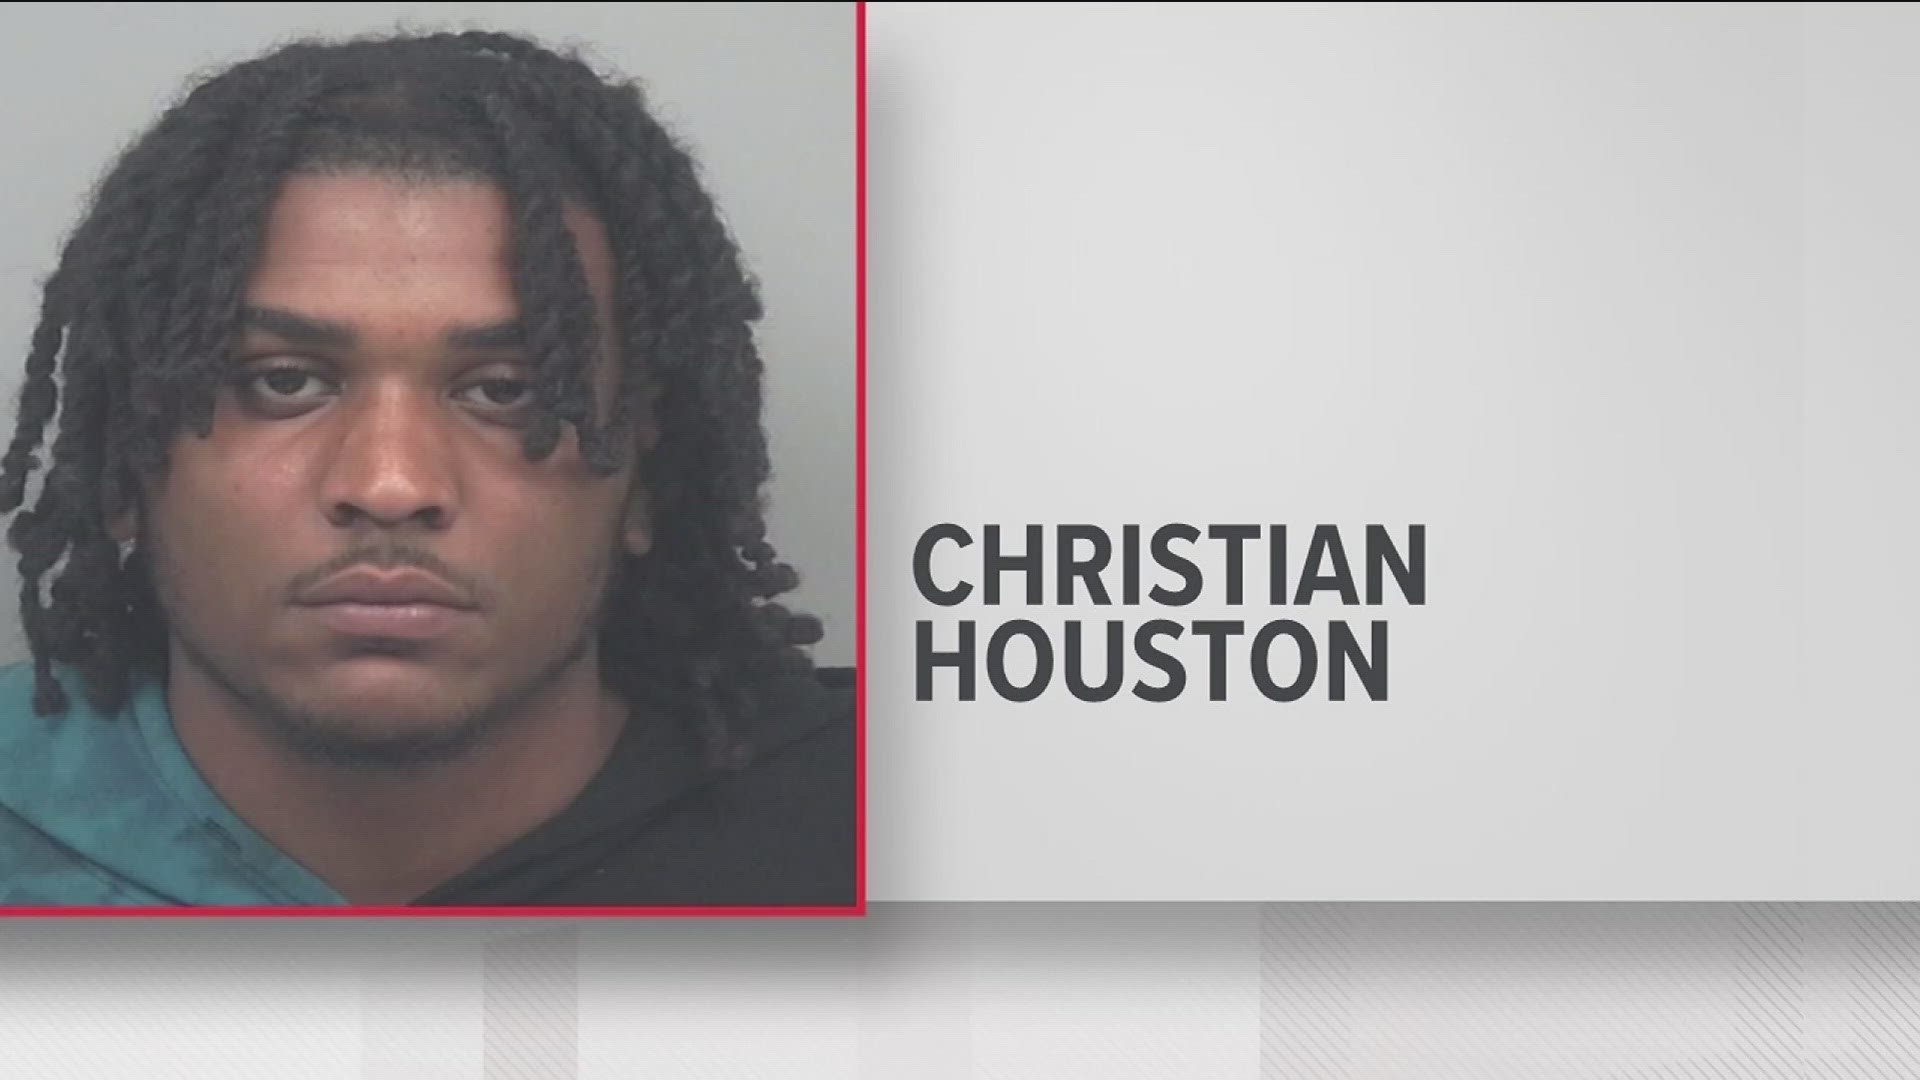 Detectives said 19-year-old Christian Houston is being charged with felony murder, among other crimes.